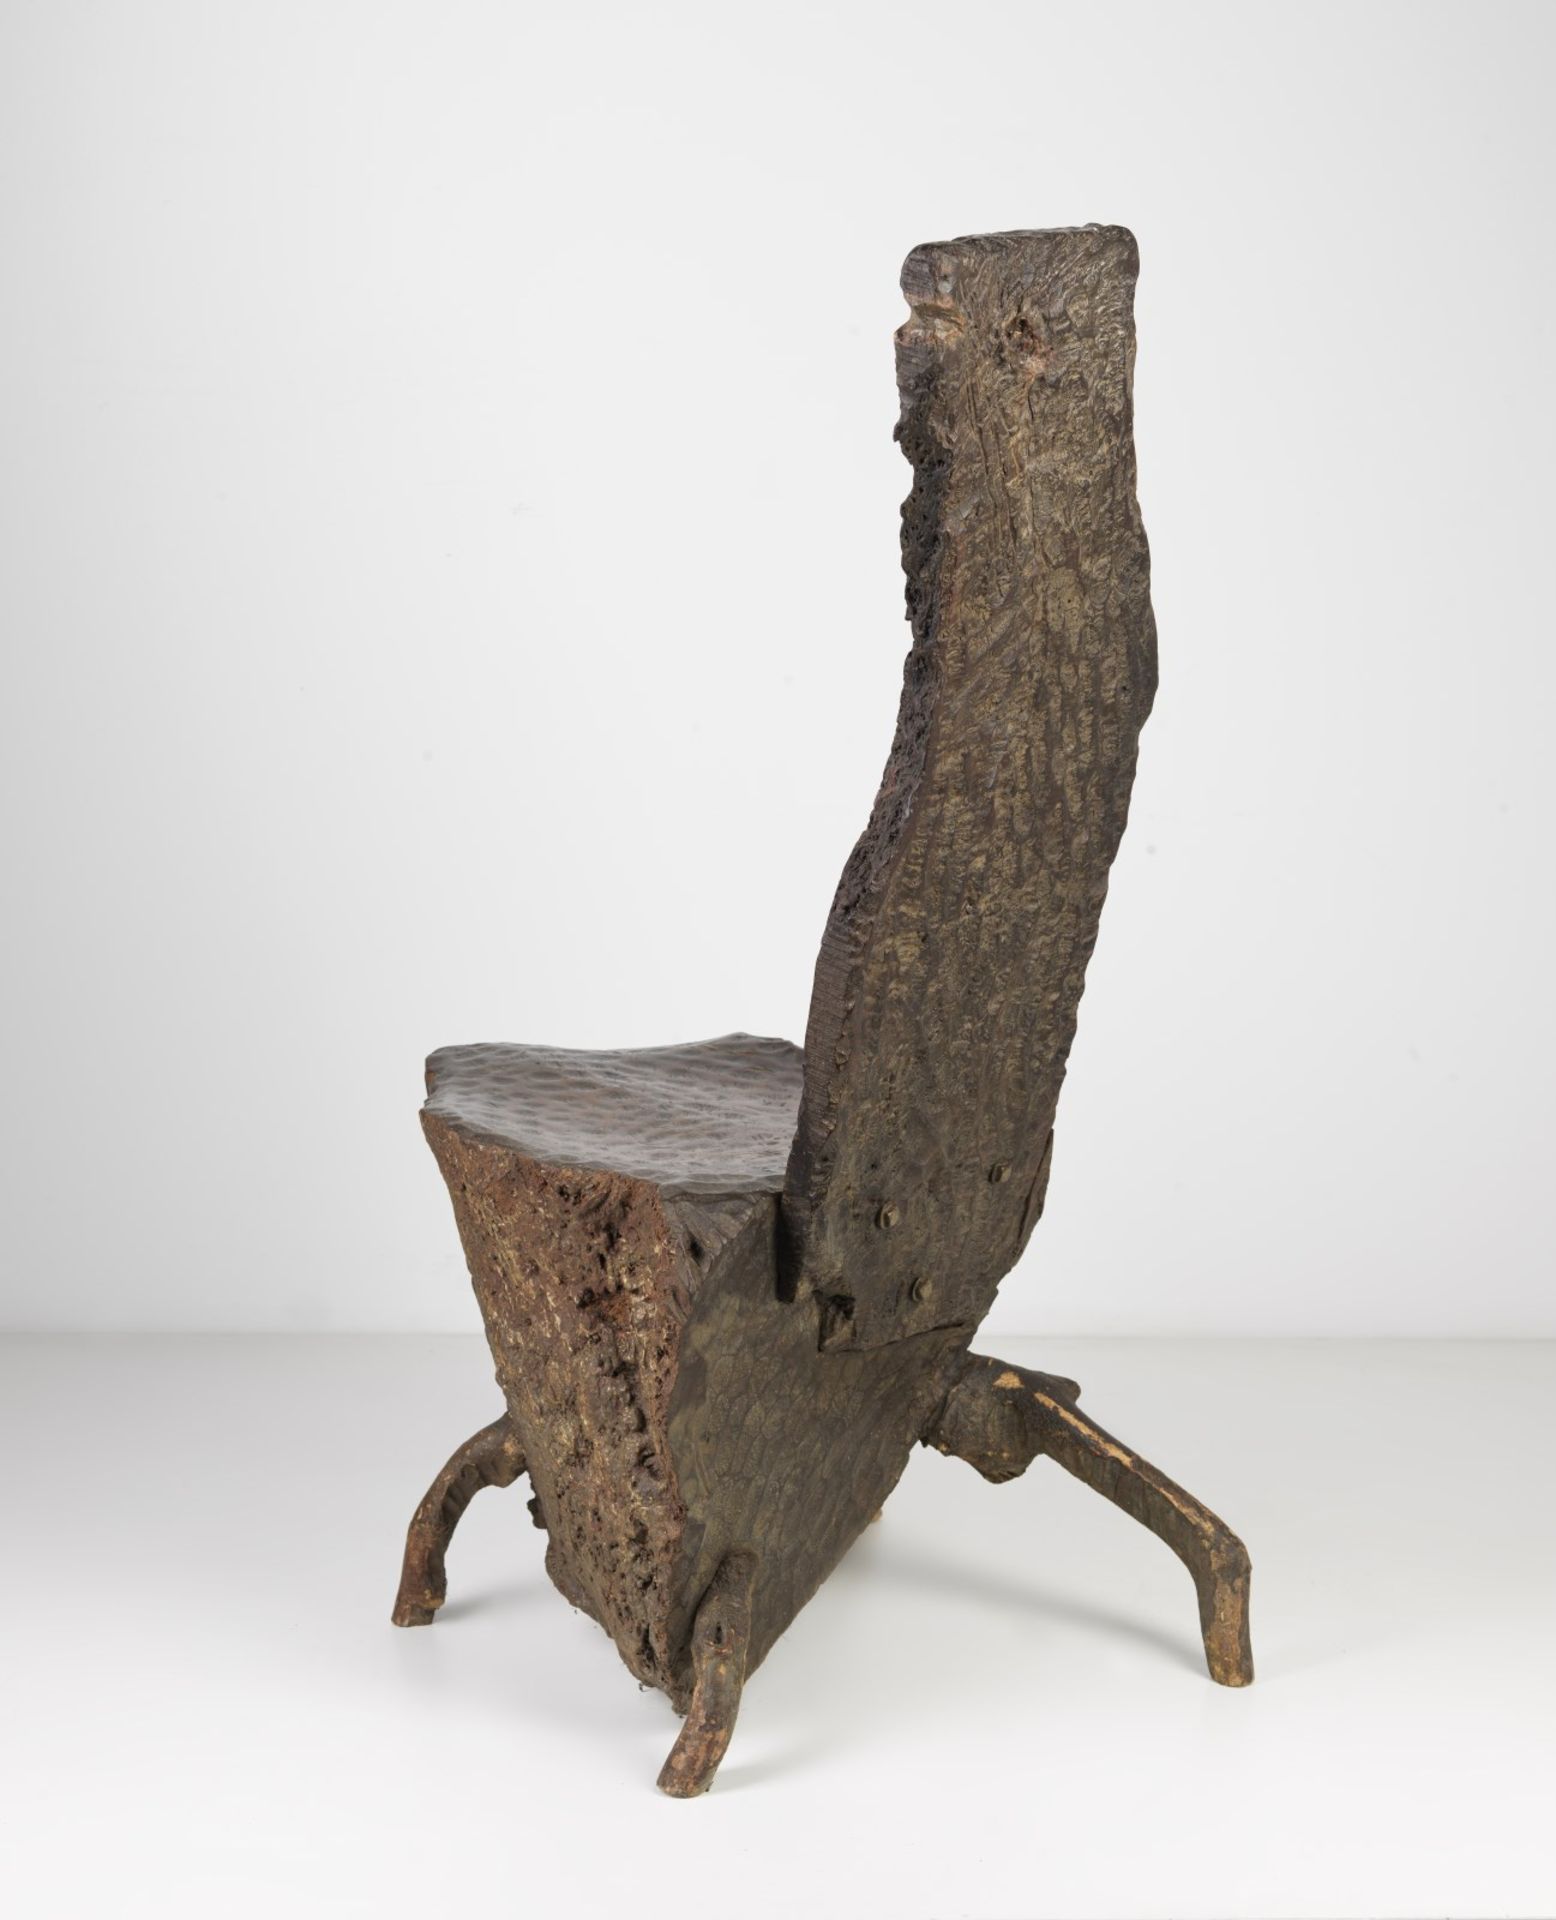 Naturalia A wooden root chair Central Europe, 19th century . - Image 4 of 4